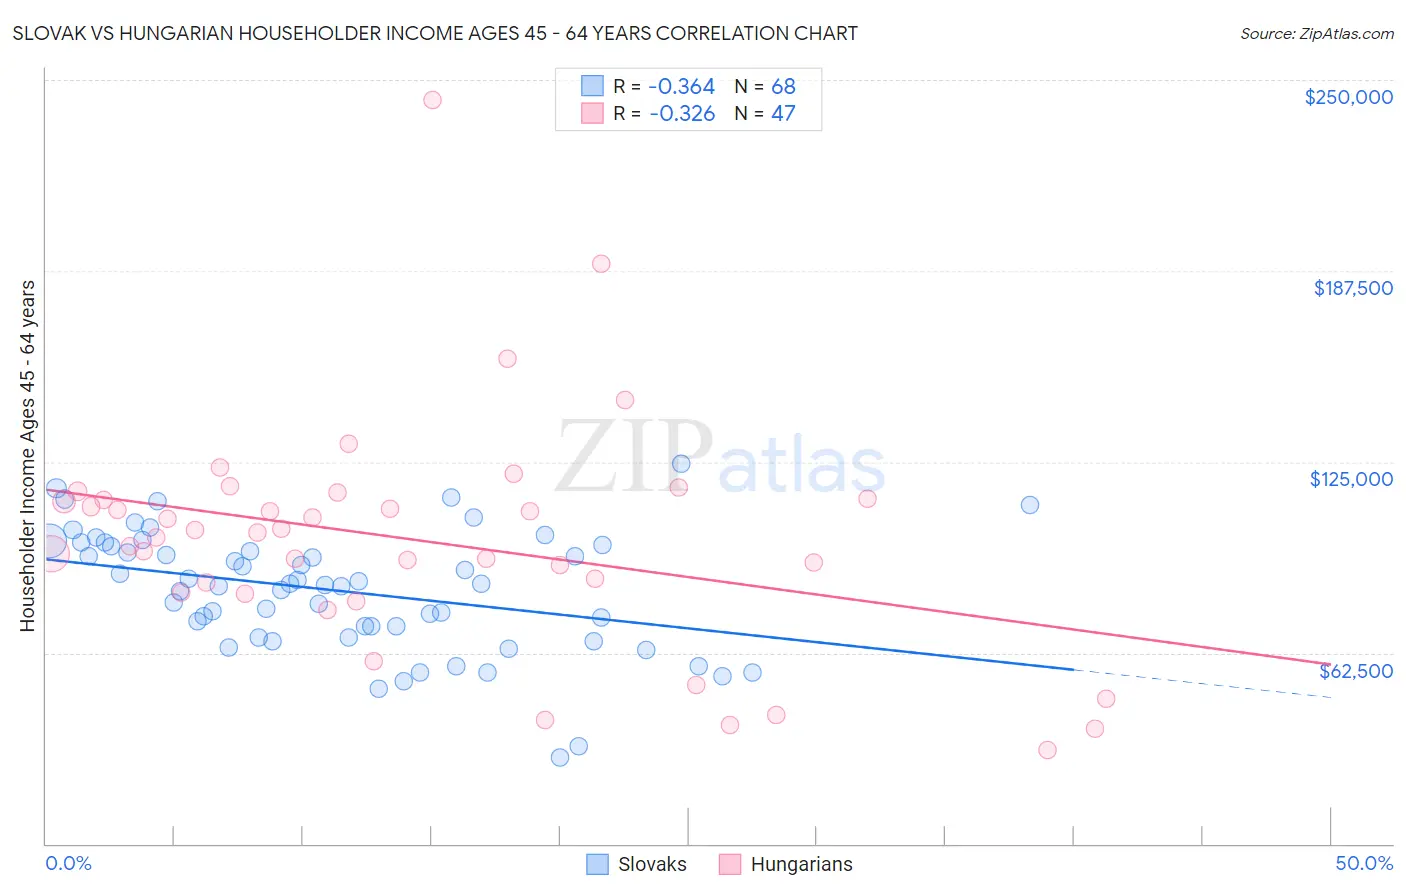 Slovak vs Hungarian Householder Income Ages 45 - 64 years